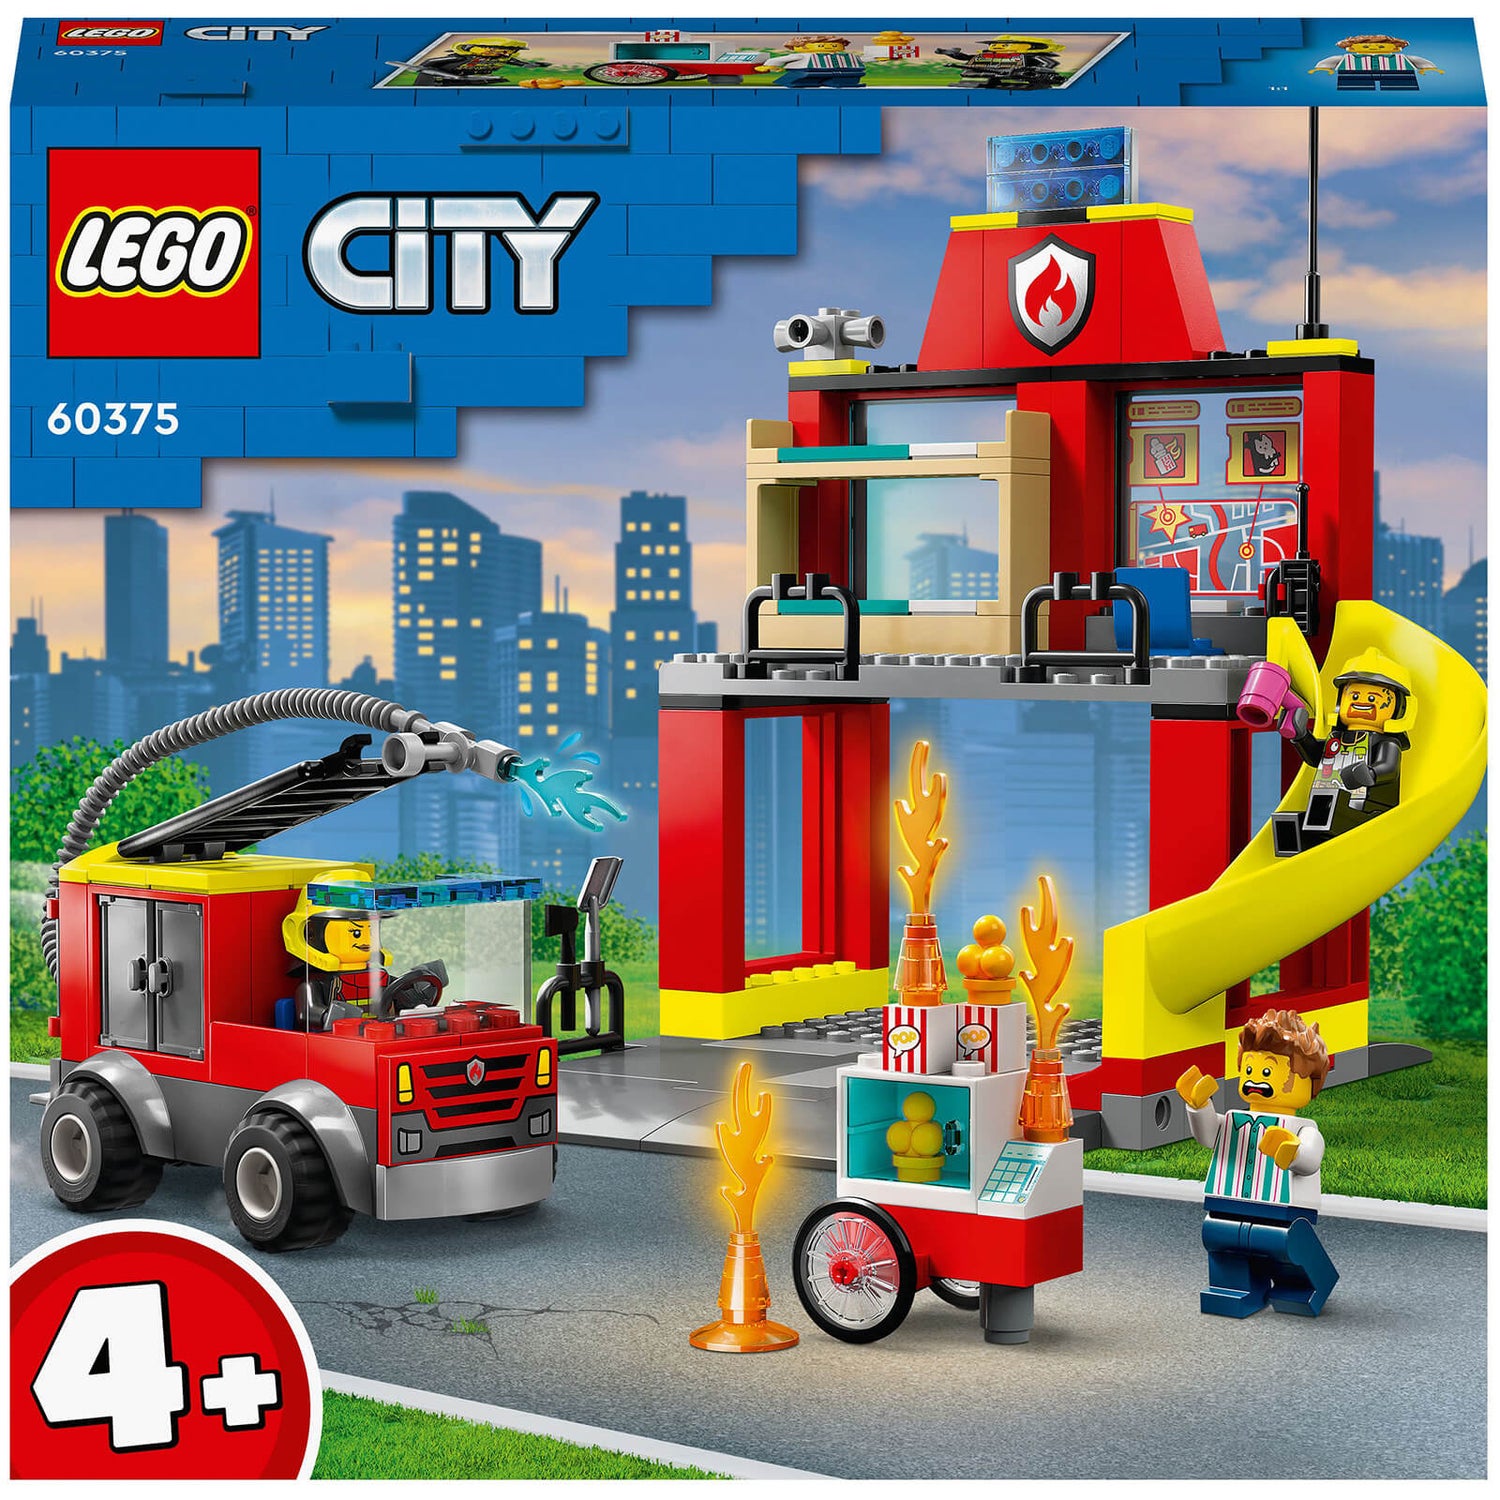 LEGO City: 4+ Fire Station and Fire Engine Toy Playset (60375)